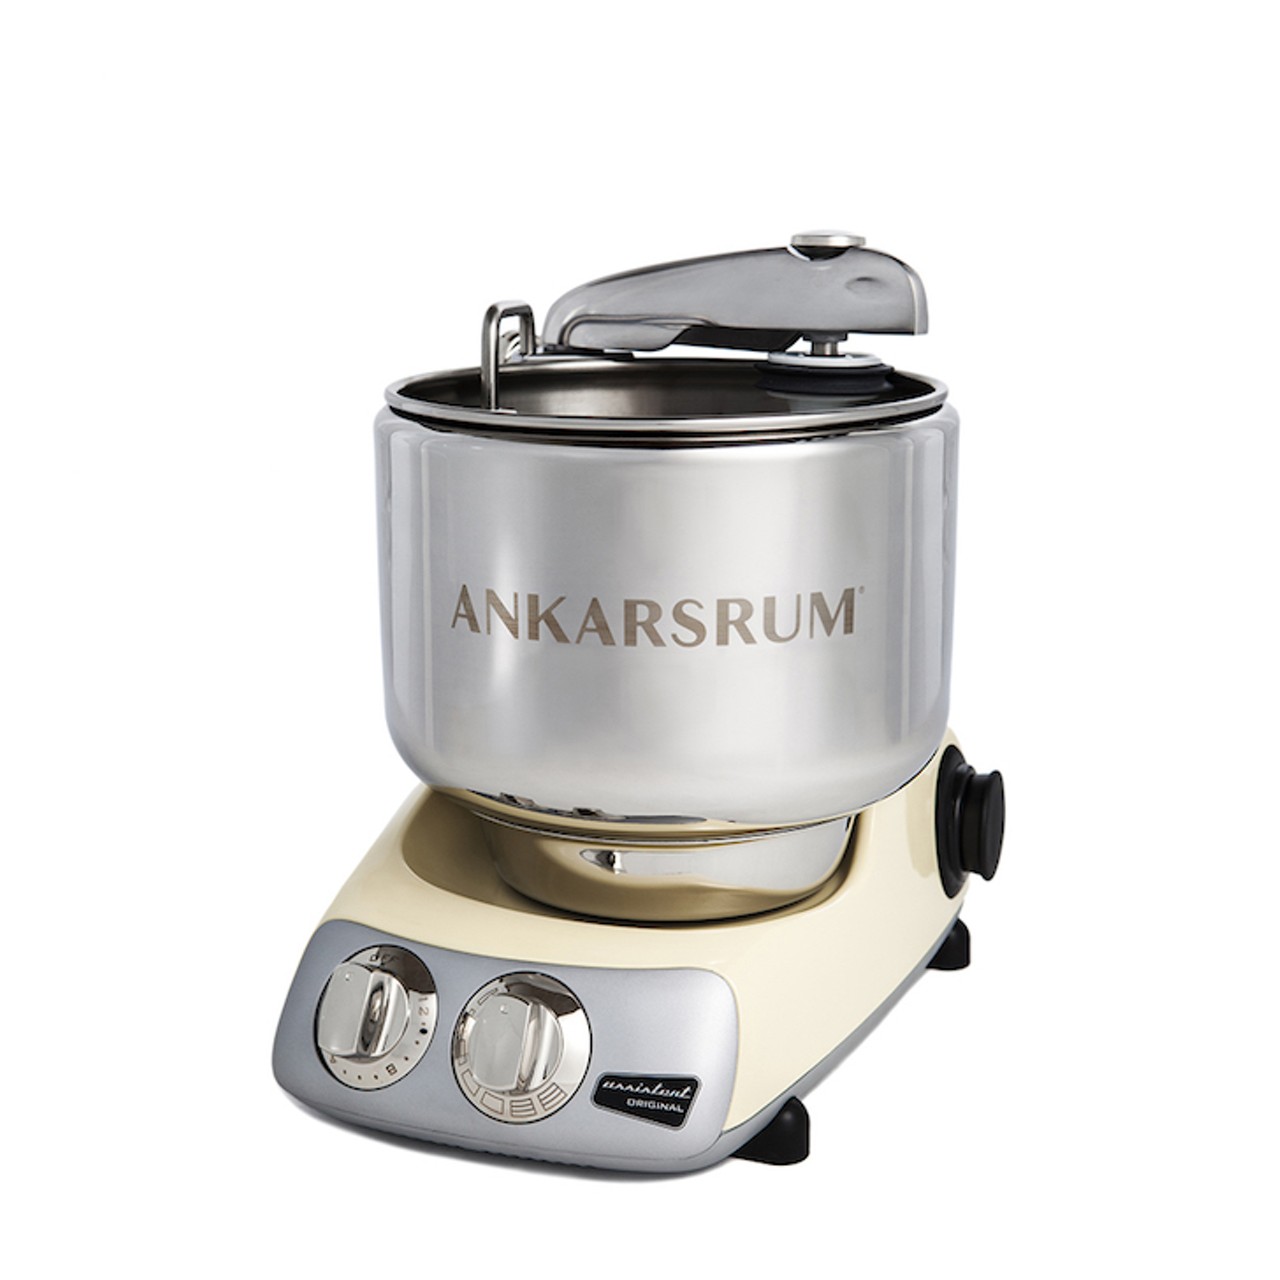 Ankarsrum Original Kitchen Machine ($699.95)
This durable and powerful all-purpose appliance kneads dough like no other stand mixer out there. With all the additional attachments and accessories, it practically negates the need for a separate food processor, meat grinder or slicer. Lay the mixer on its side and affix the 5-cup-capacity pulverizer, and you won't need a separate blender either.